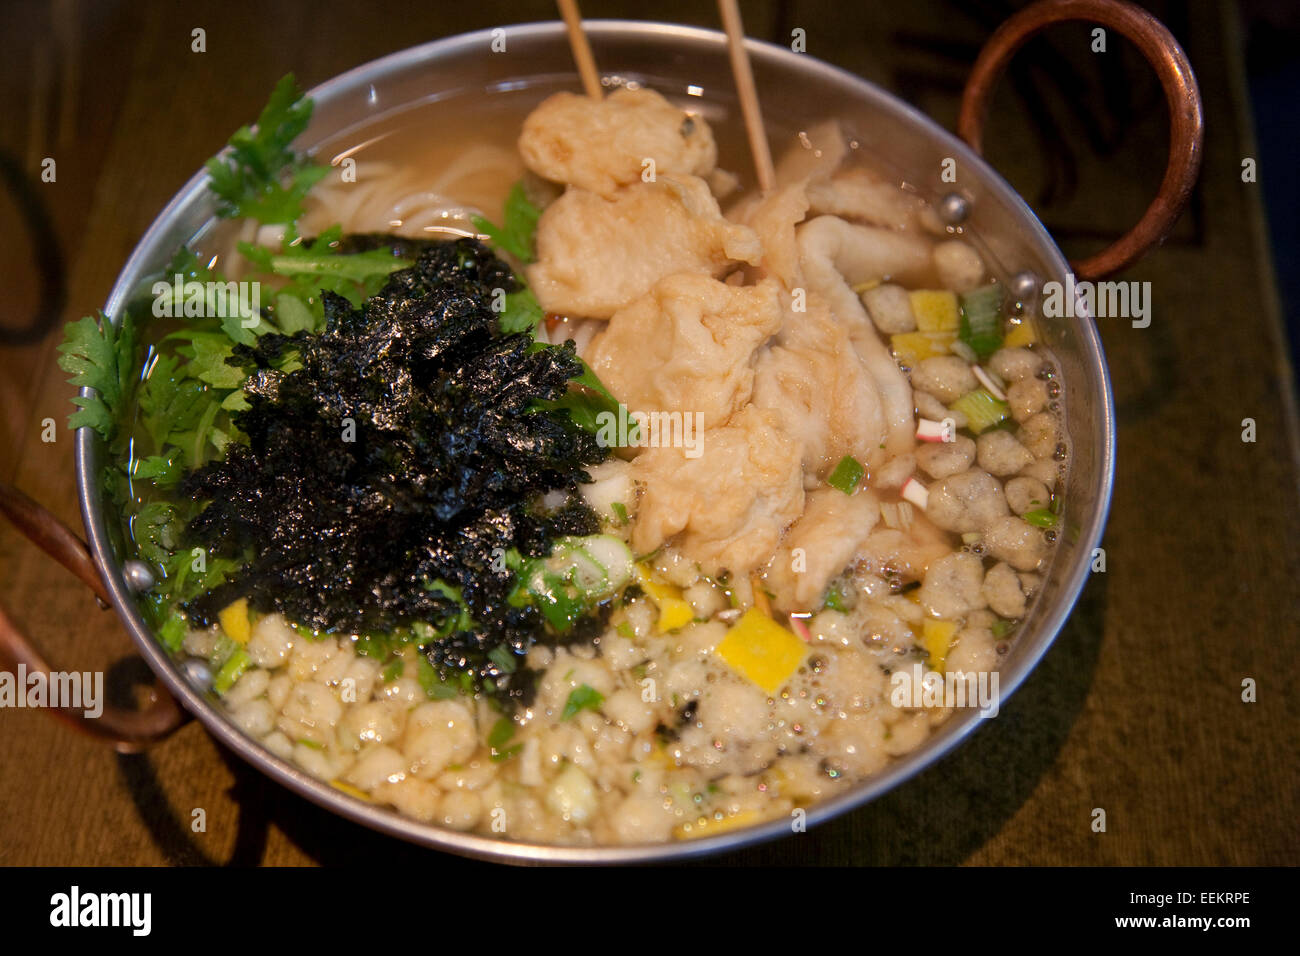 Odeng guksu is a fish cake soup with noodles served in Korea. Stock Photo